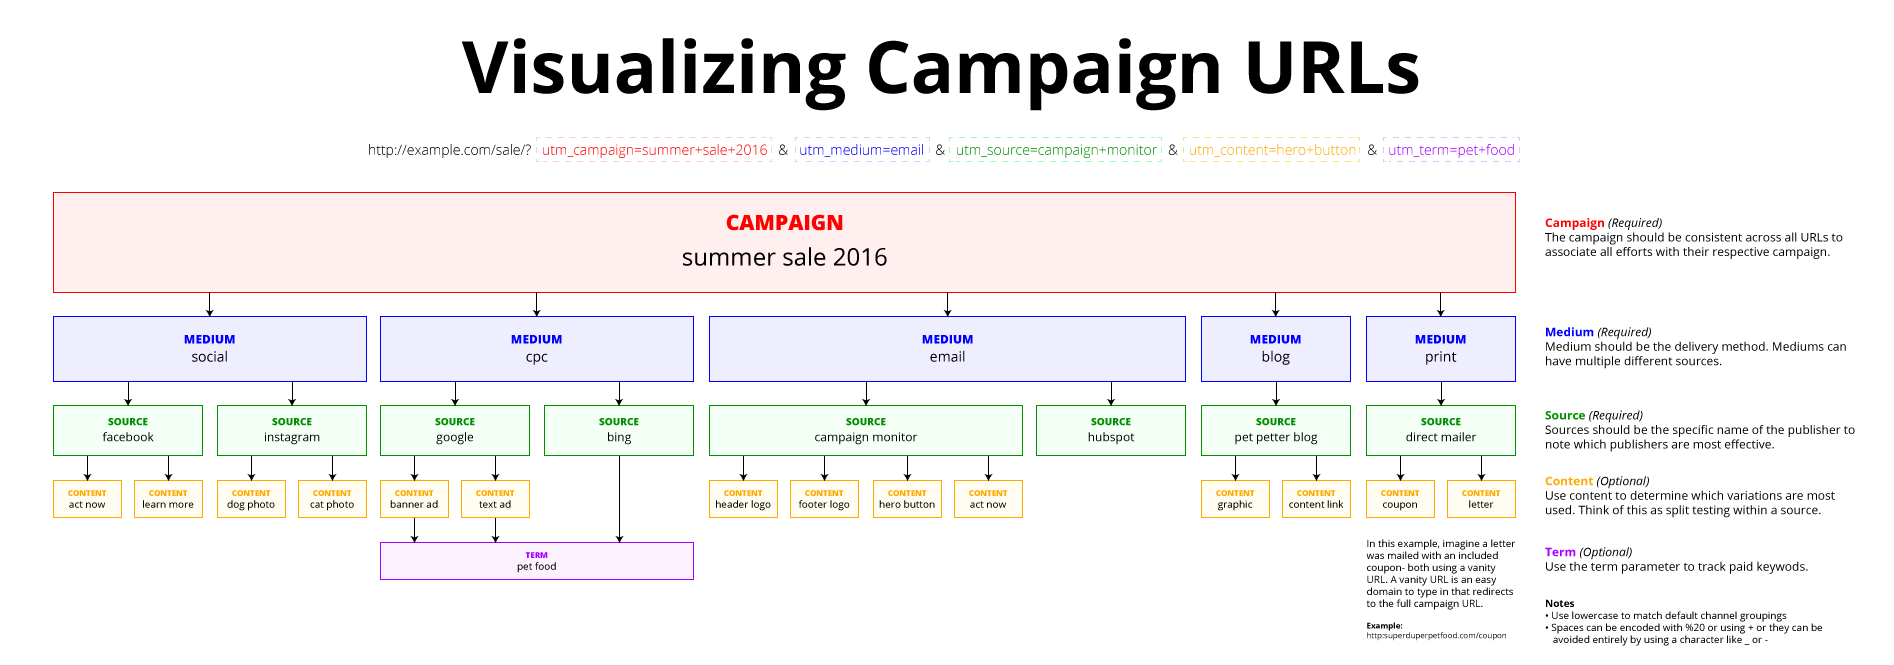 Campaign URL Infographic